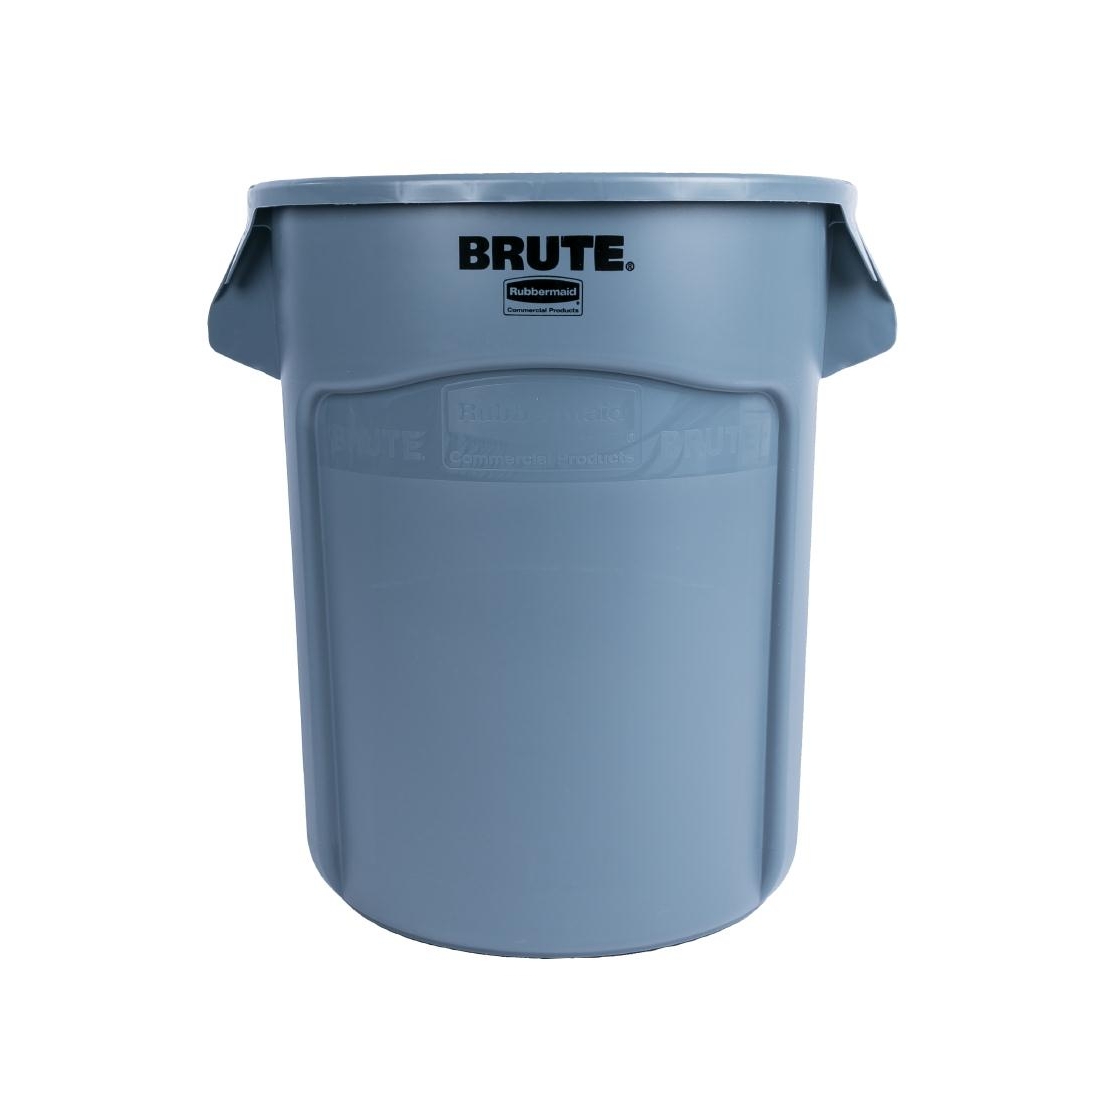 Rubbermaid Brute Utility Container 75.7Ltr